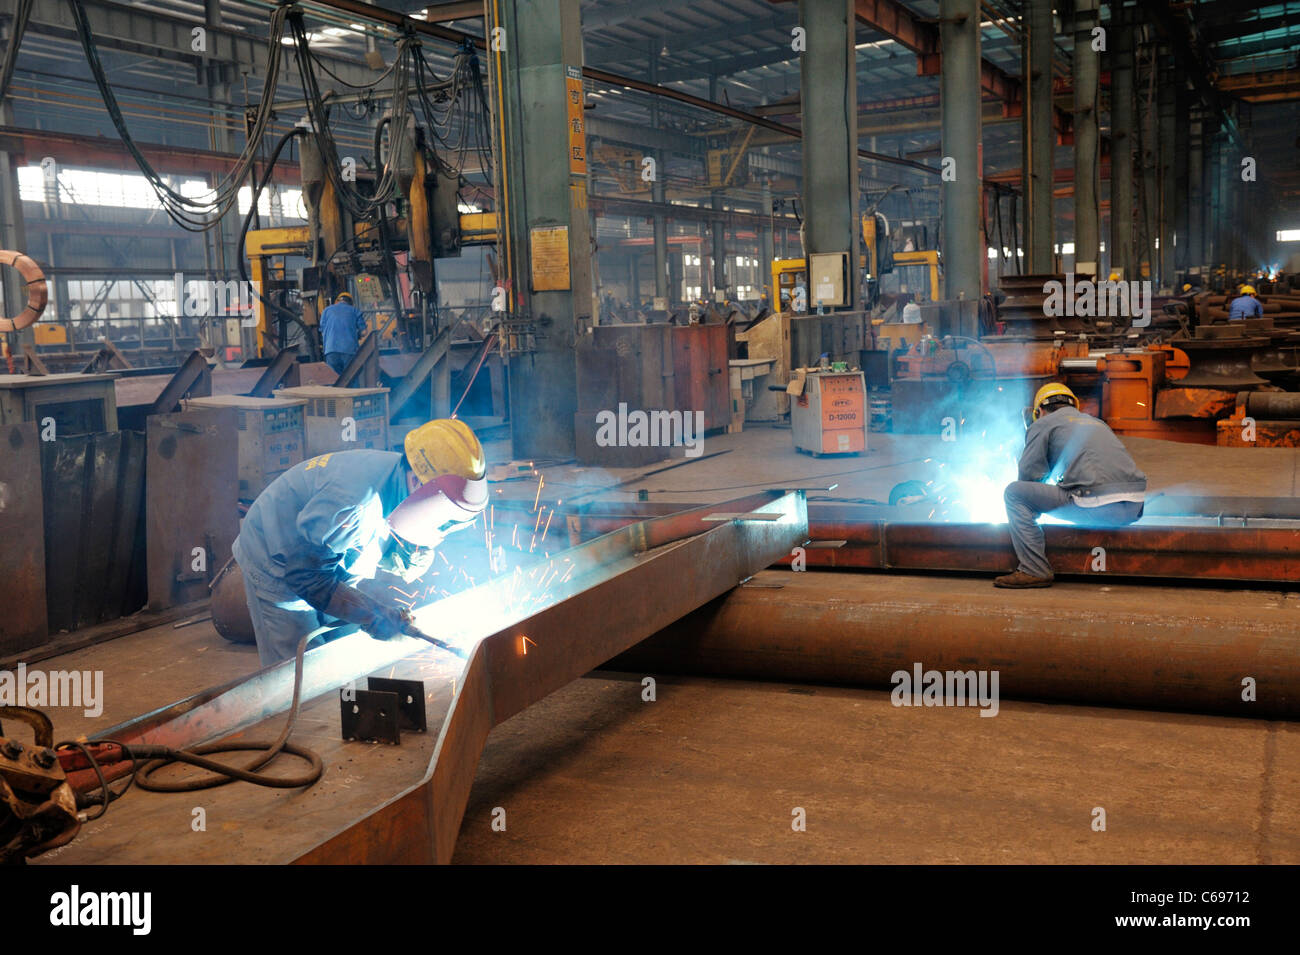 Hangzhou, Zhejiang, China. Welders and interior of one of the massive fabrication sheds of Triumpher steel works Stock Photo